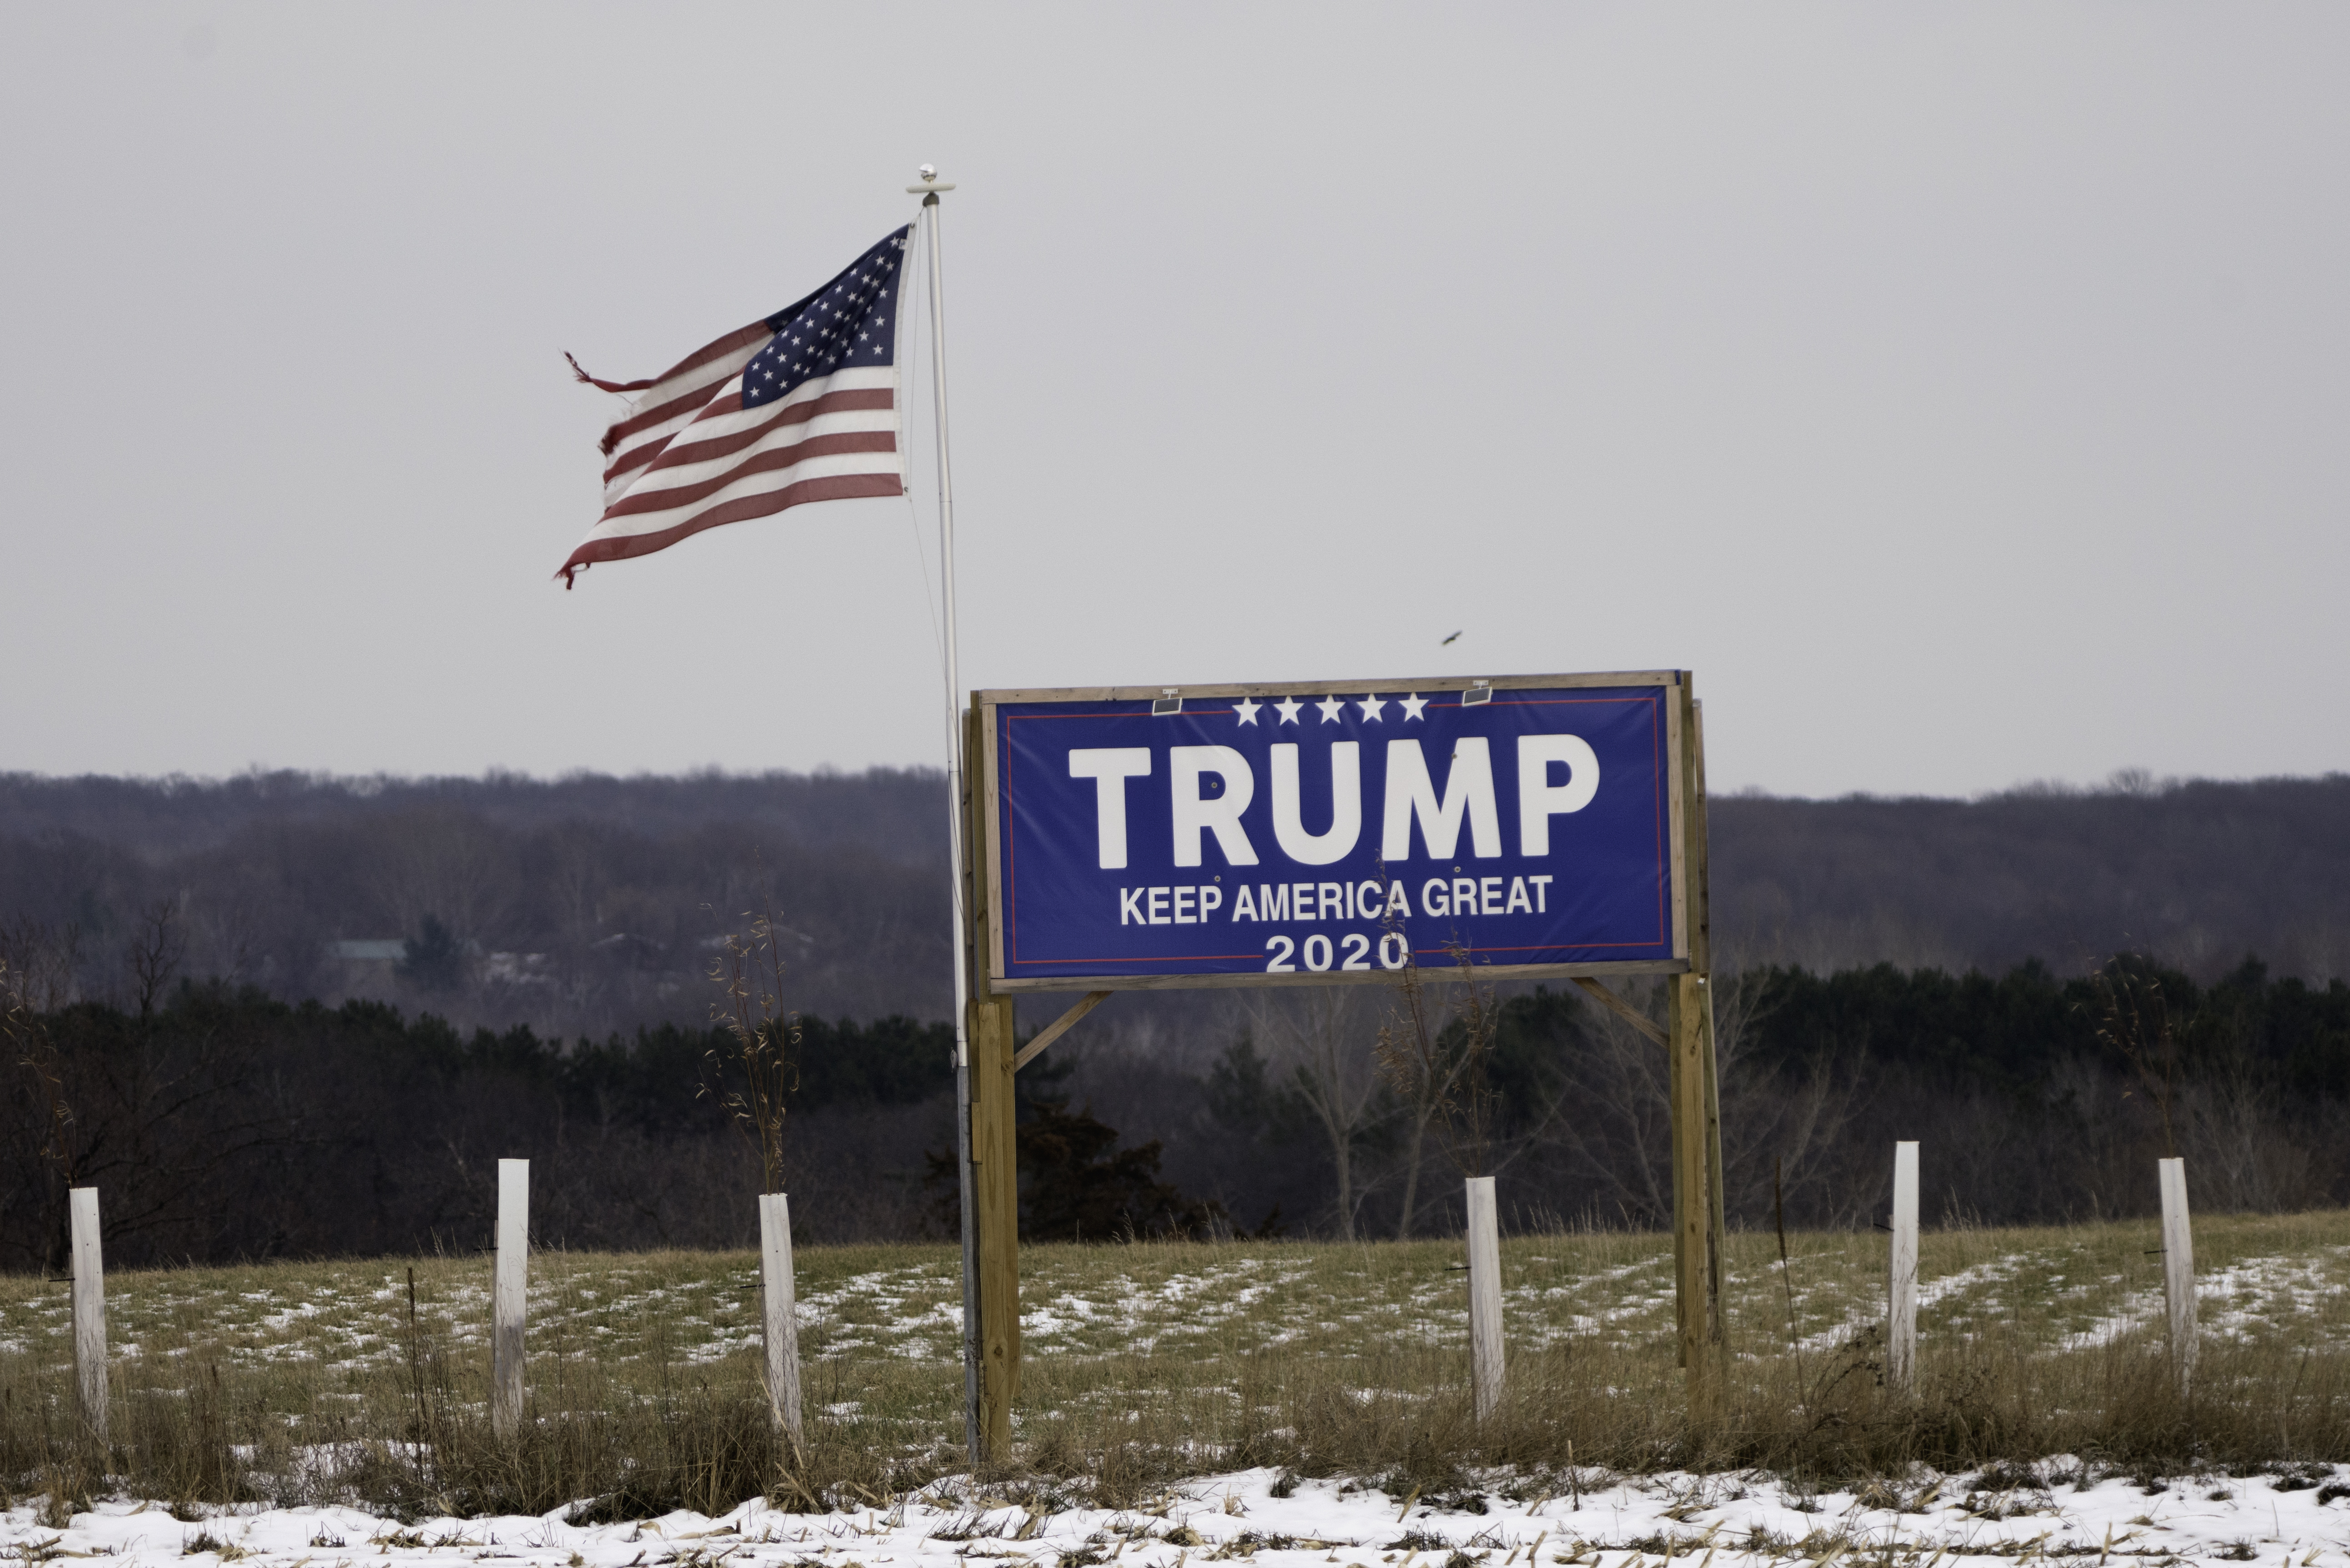 A Trump sign and torn US flag flying after the election near St Croix Falls, Wisconsin. Photo by Lorie Shaull from St Paul, United States, CC BY-SA 2.0 , via Wikimedia Commons